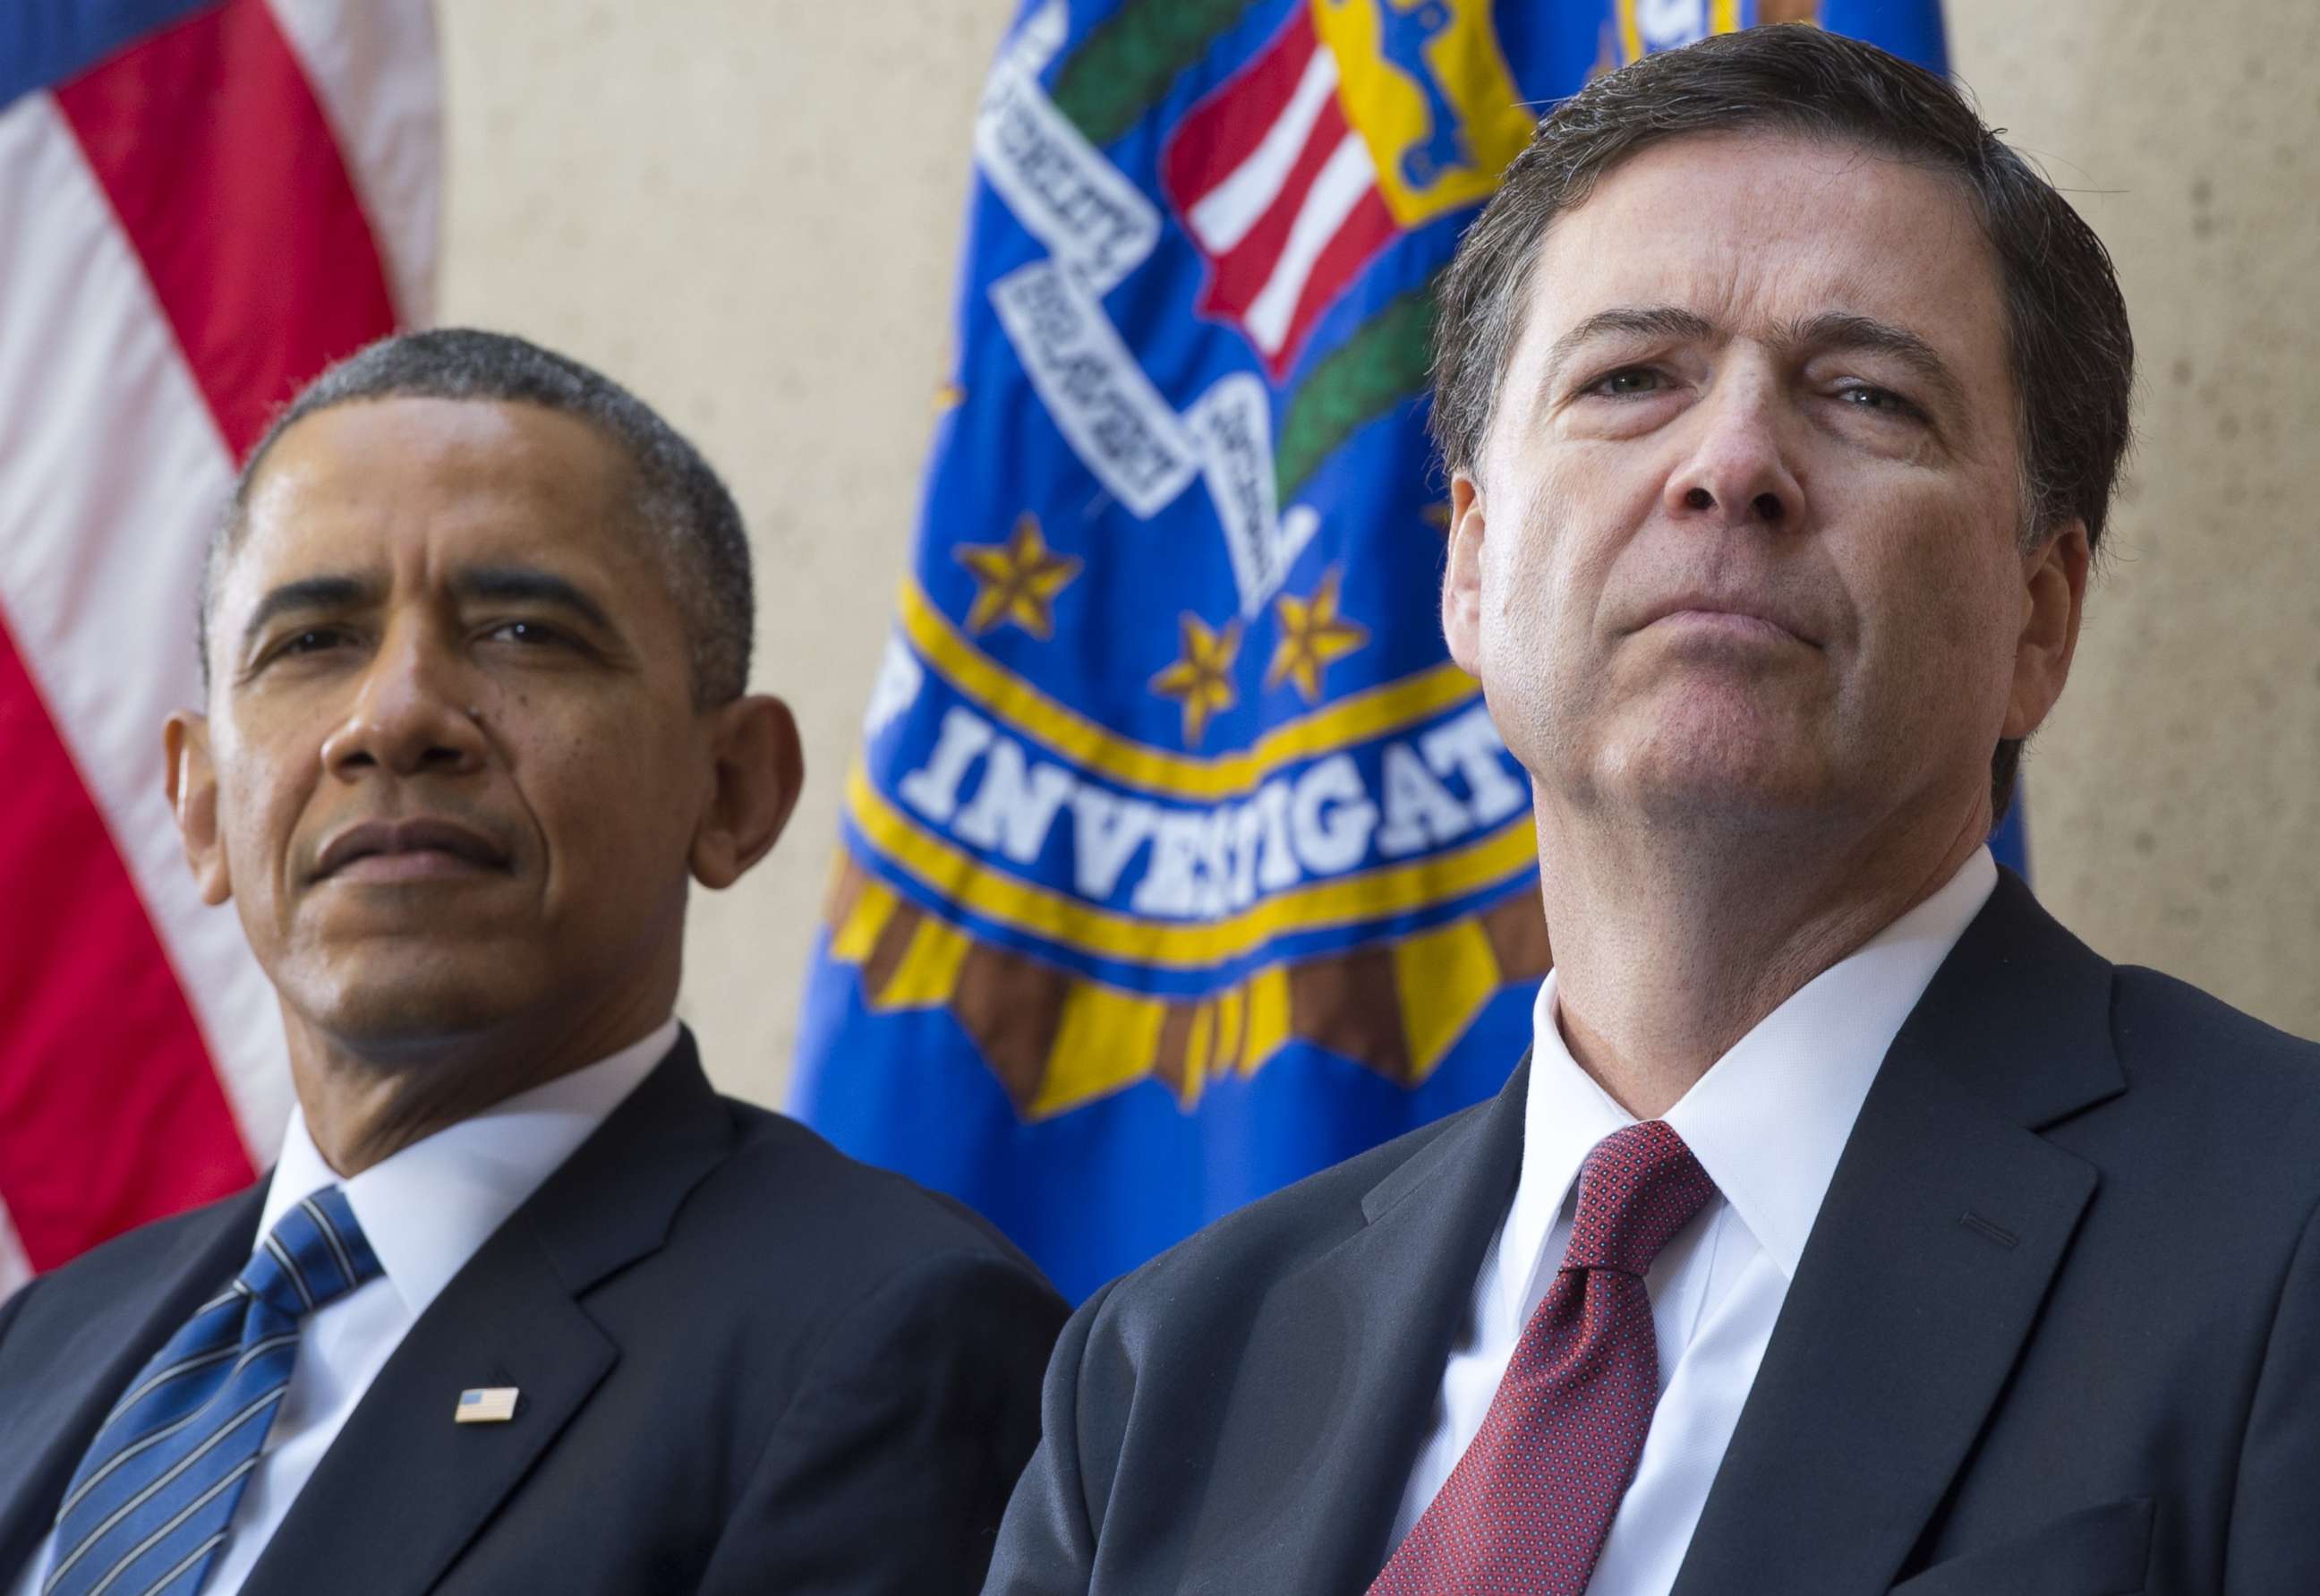 PHOTO: Barack Obama sits alongside James Comey during an installation ceremony at Federal Bureau of Investigation Headquarters in Washington, DC, Oct. 28, 2013.